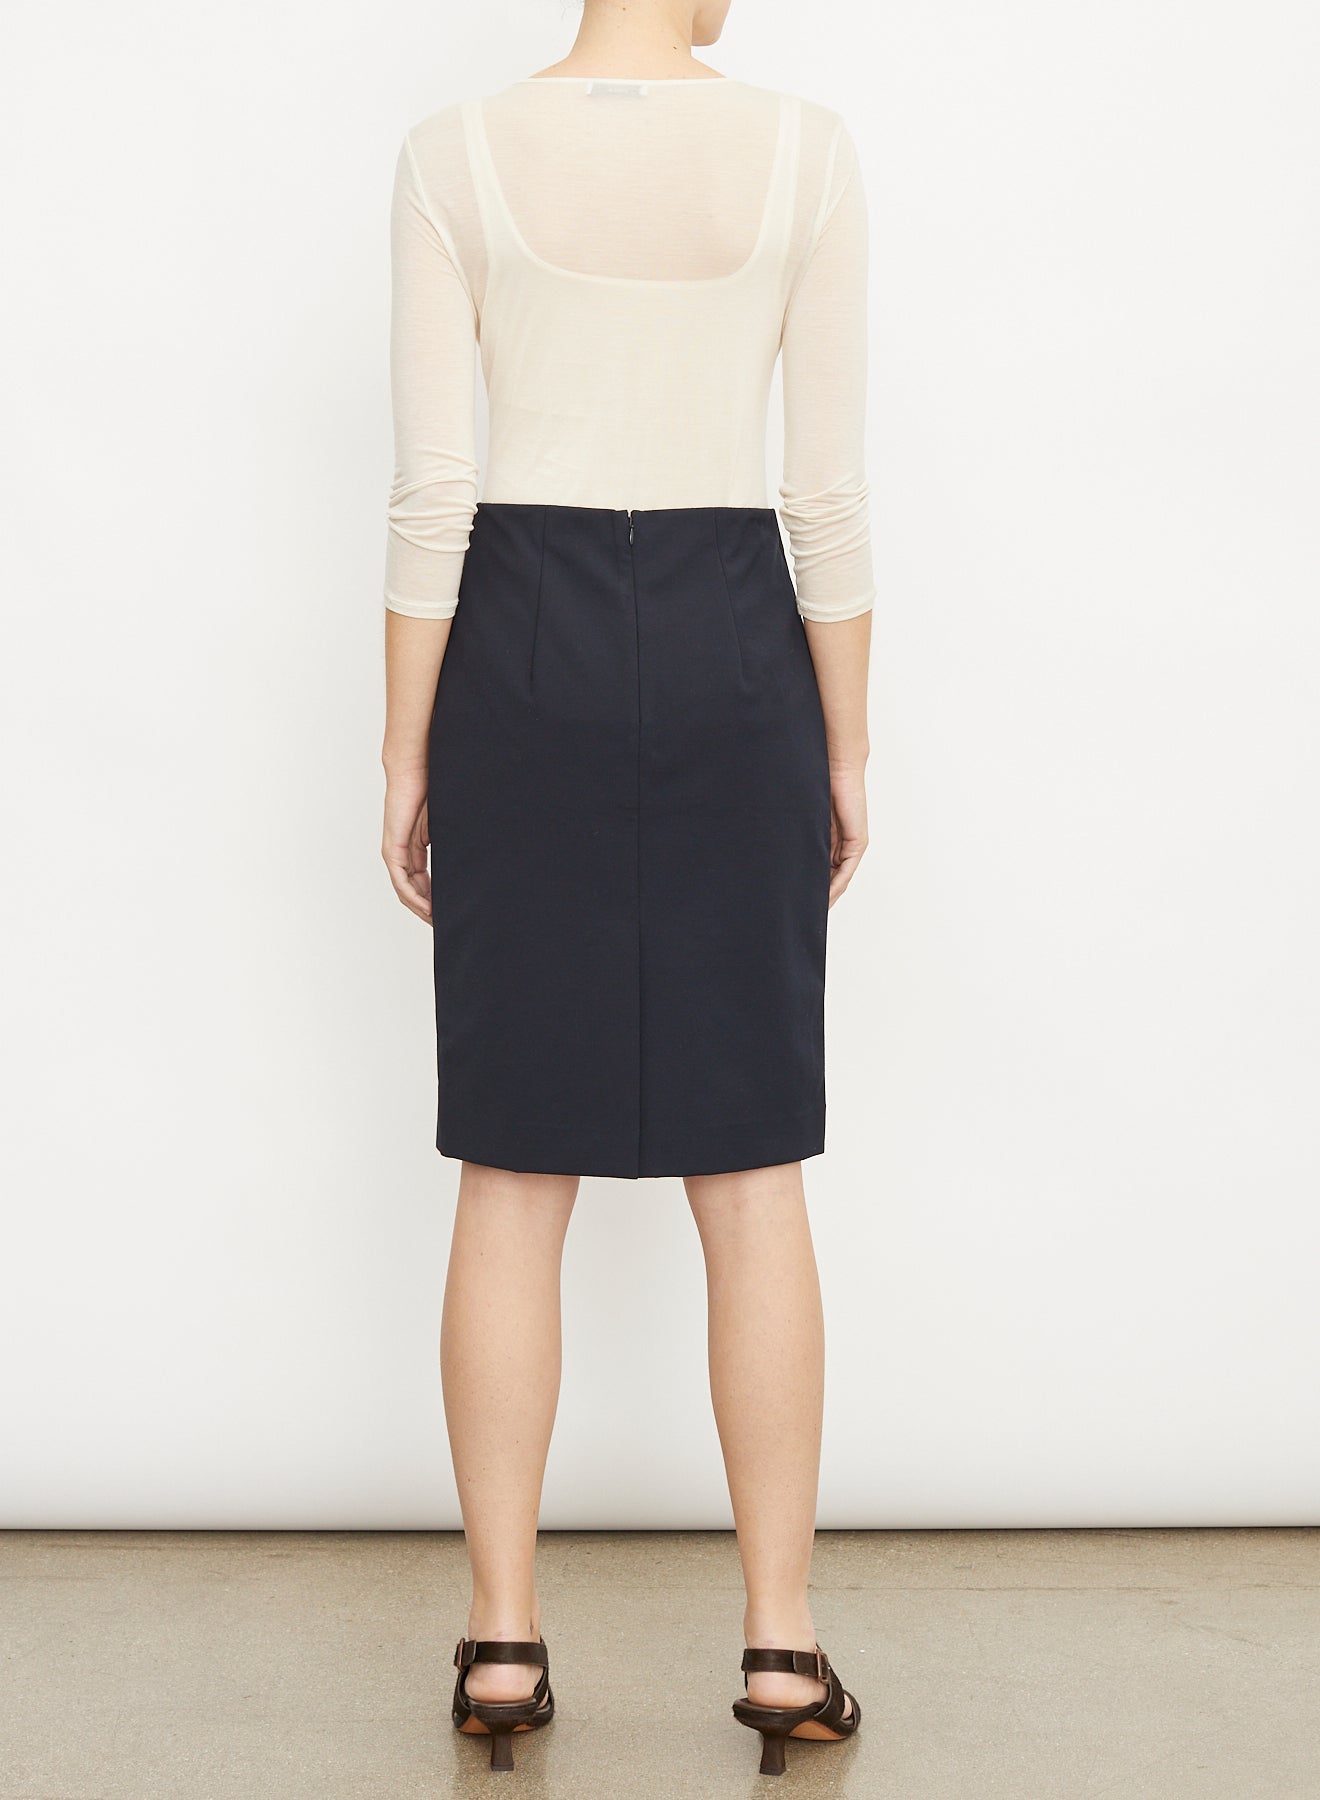 SEAMED FRONT PENCIL SKIRT IN BLACK - Romi Boutique